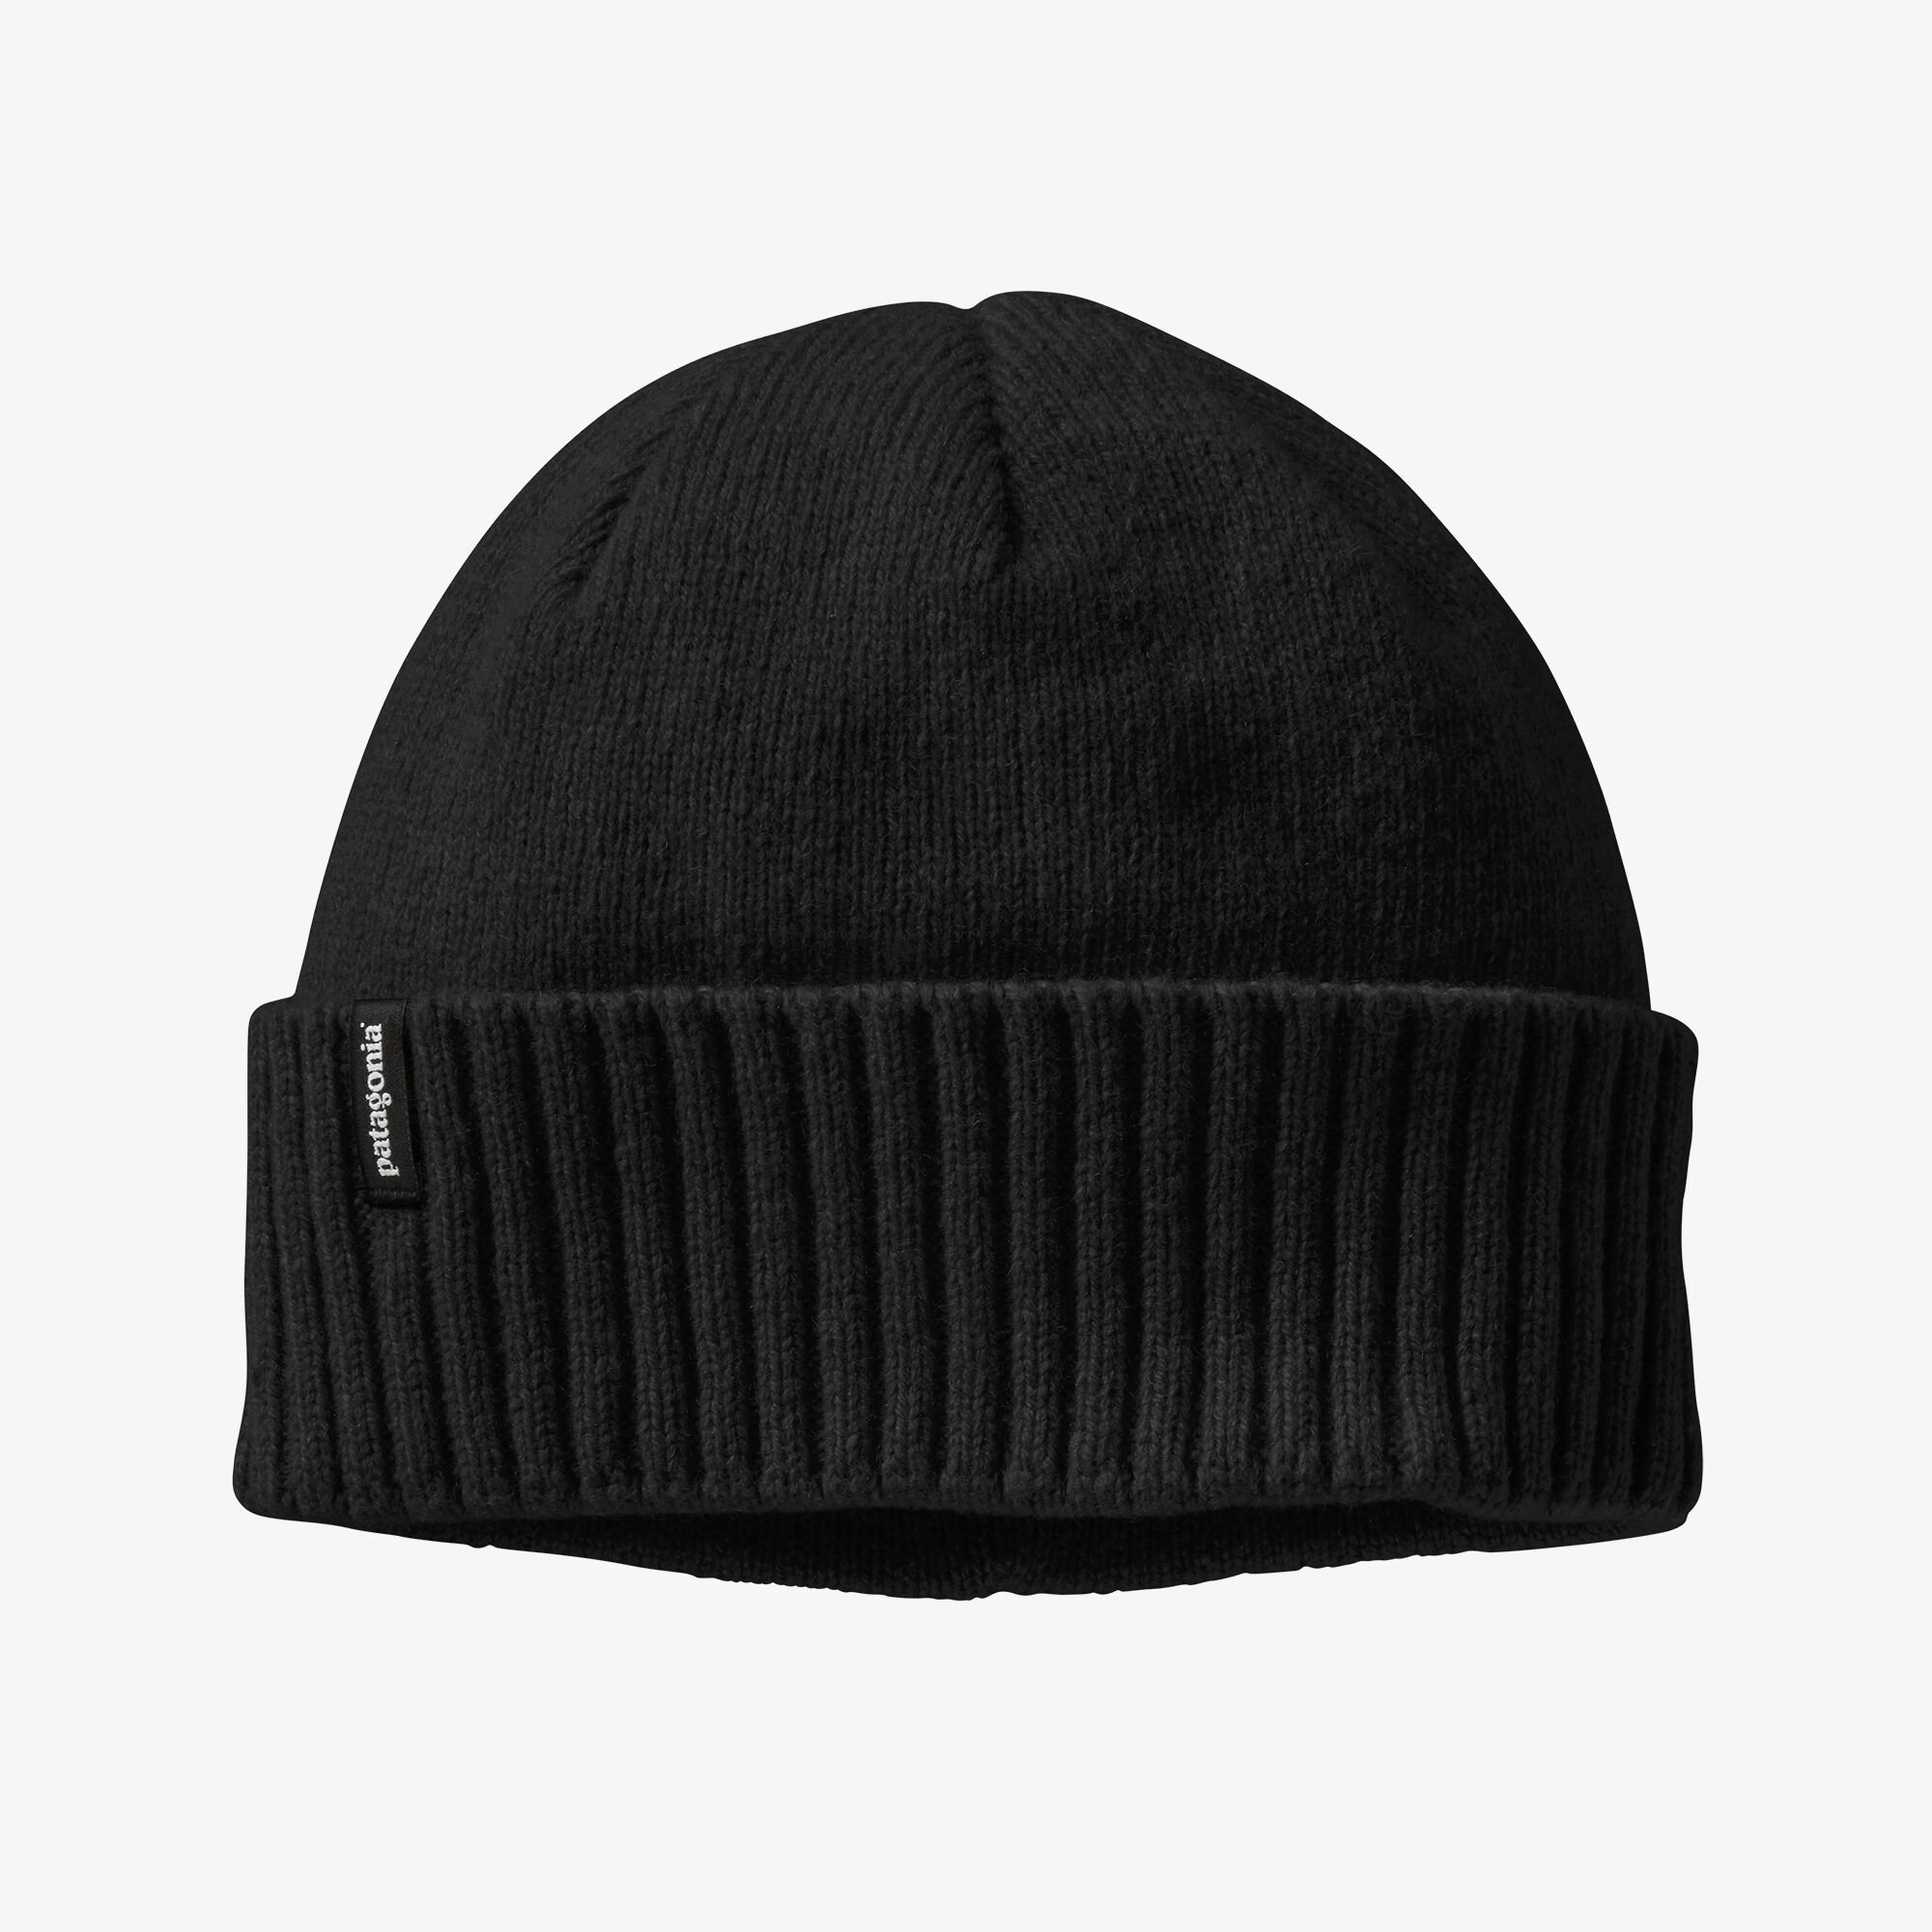 PATAGONIA – BRODEO BEANIE – LUE (FLERE FARGER / UNISEX)